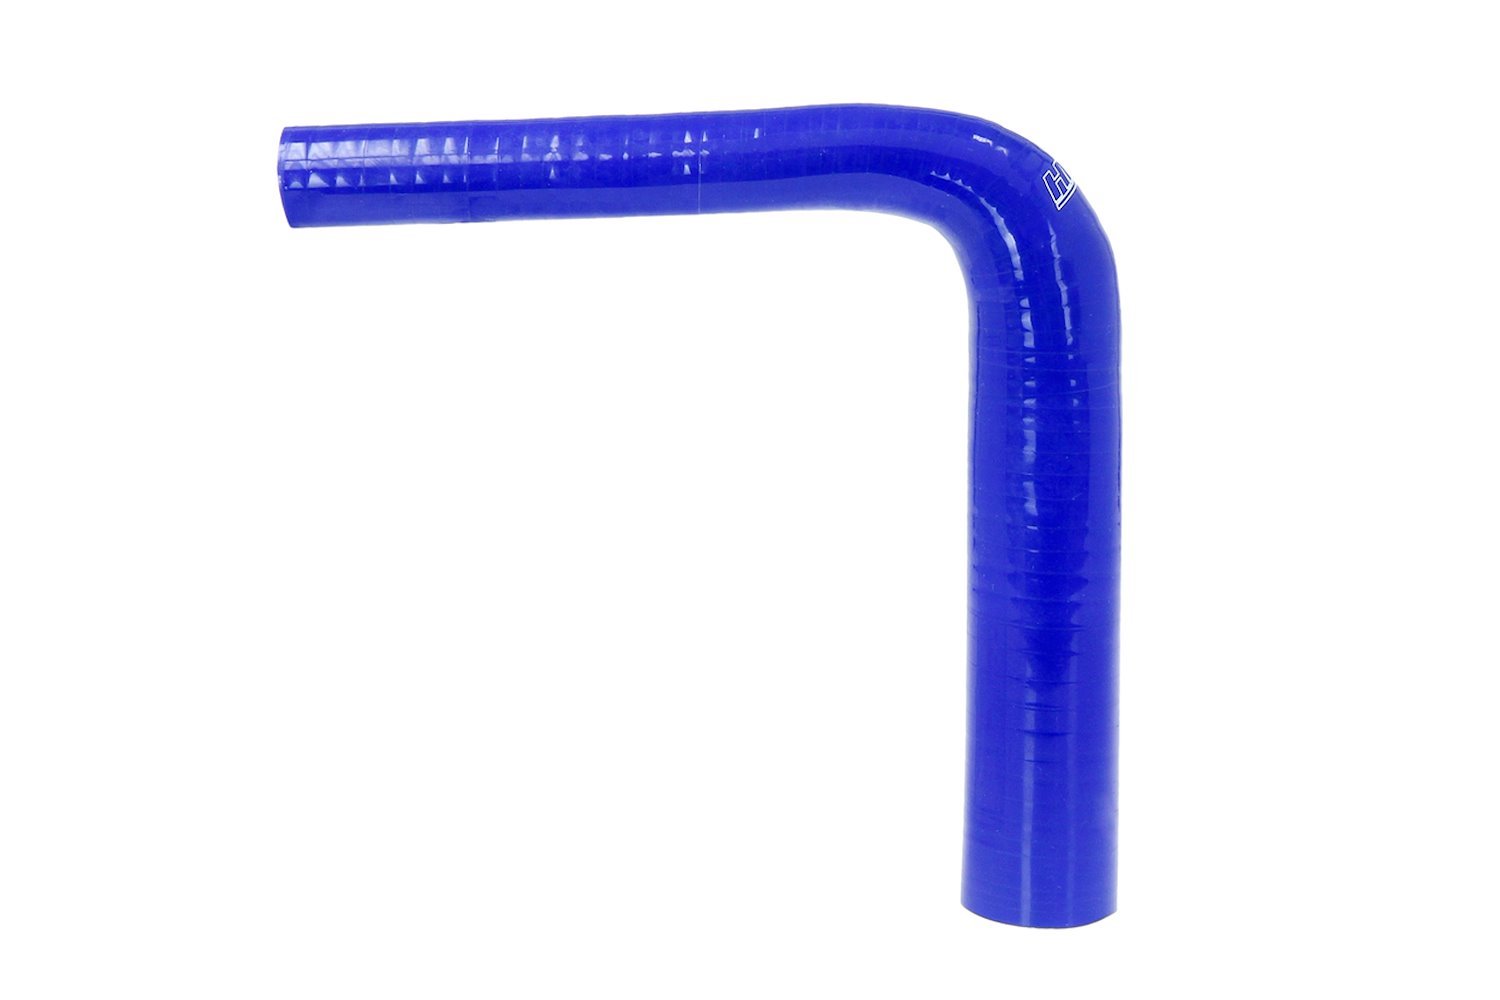 HTSER90-100-125-BLUE Silicone 90-Degree Elbow Hose, High-Temp 4-Ply Reinforced, 1 in. - 1-1/4 in. ID, Blue